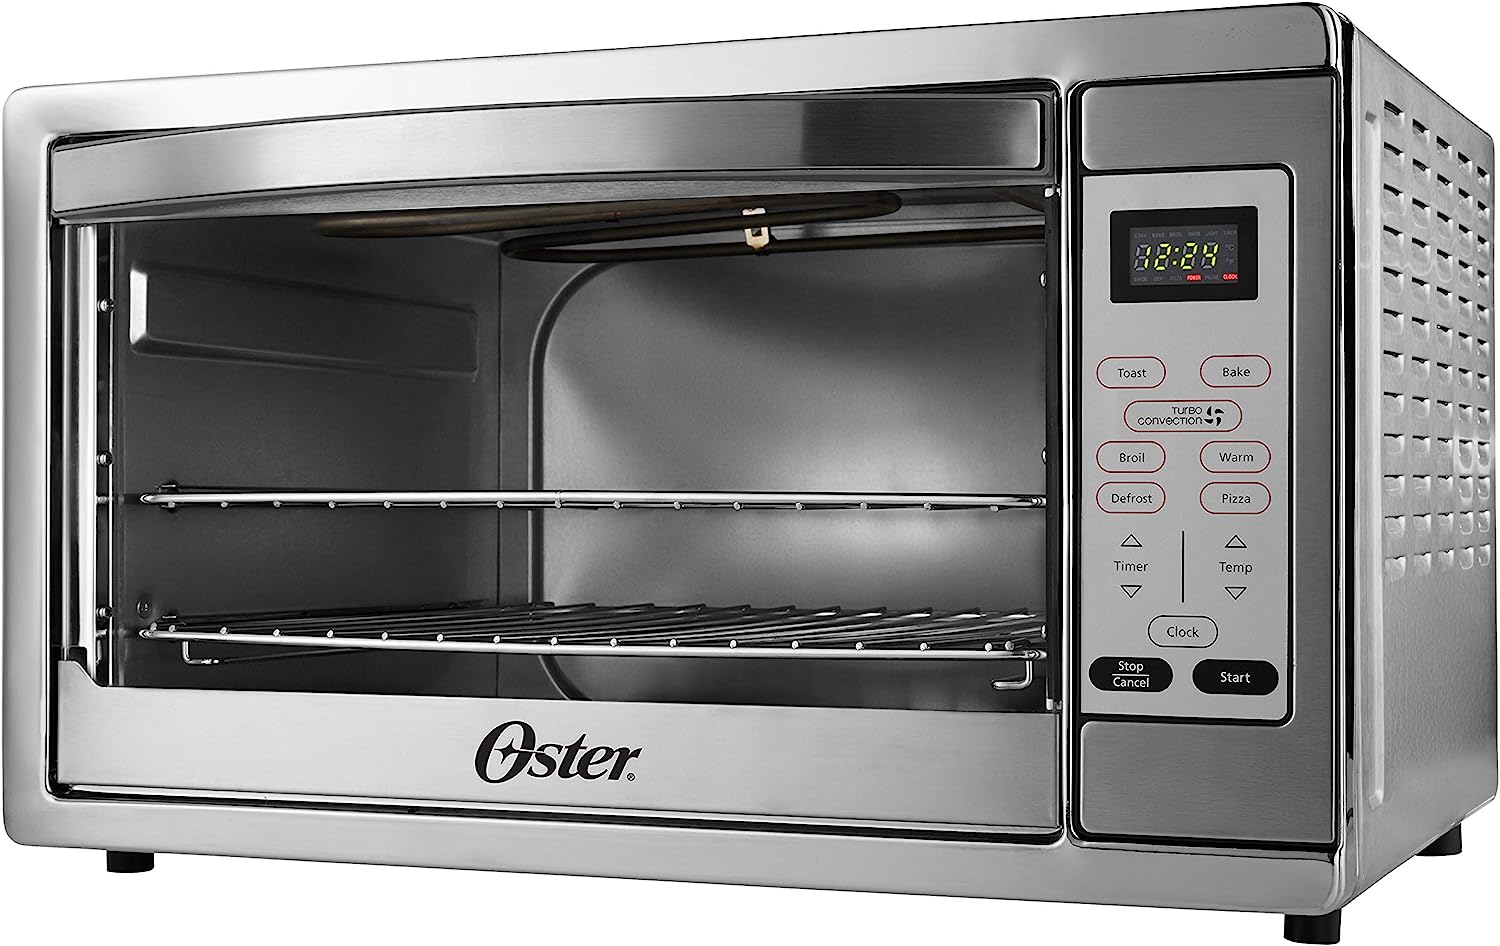 Oster Toaster Oven, 7-in-1 Countertop Toaster Oven, [...]